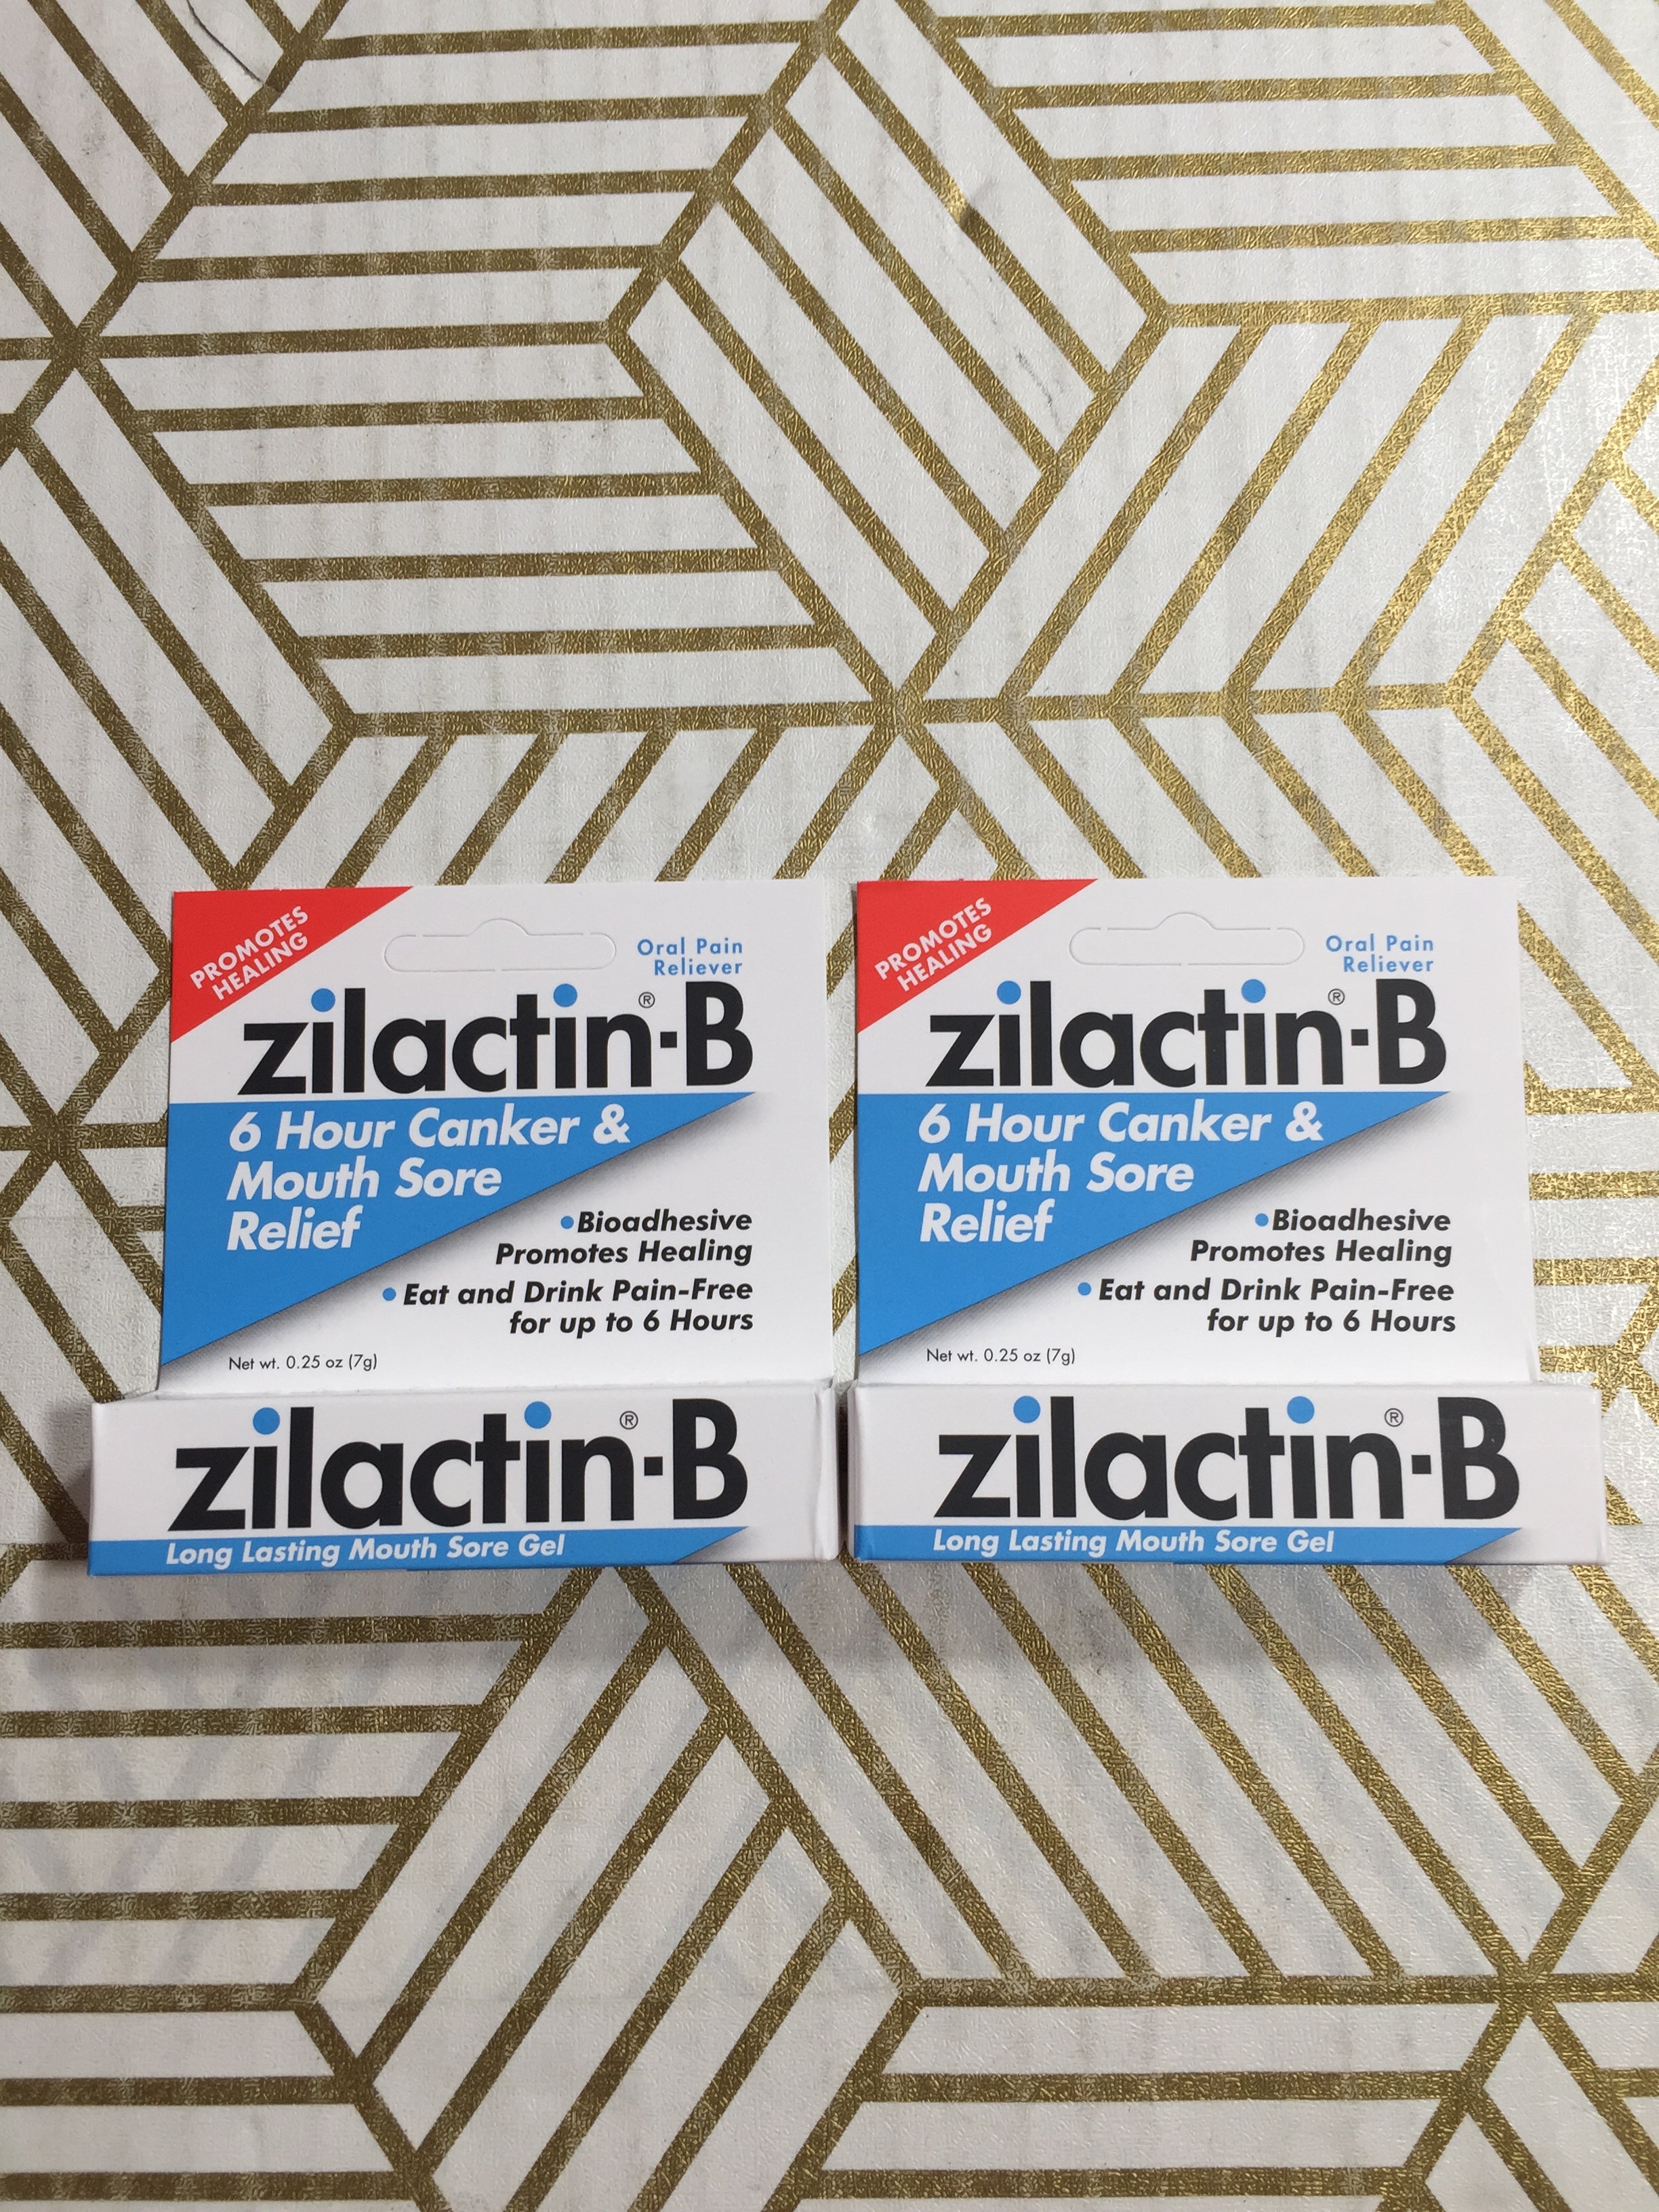 Zilactin-B Oral Pain Reliever, 6 Hour Canker & Mouth Sore Relief Gel *2 PACK* (8091375141102)